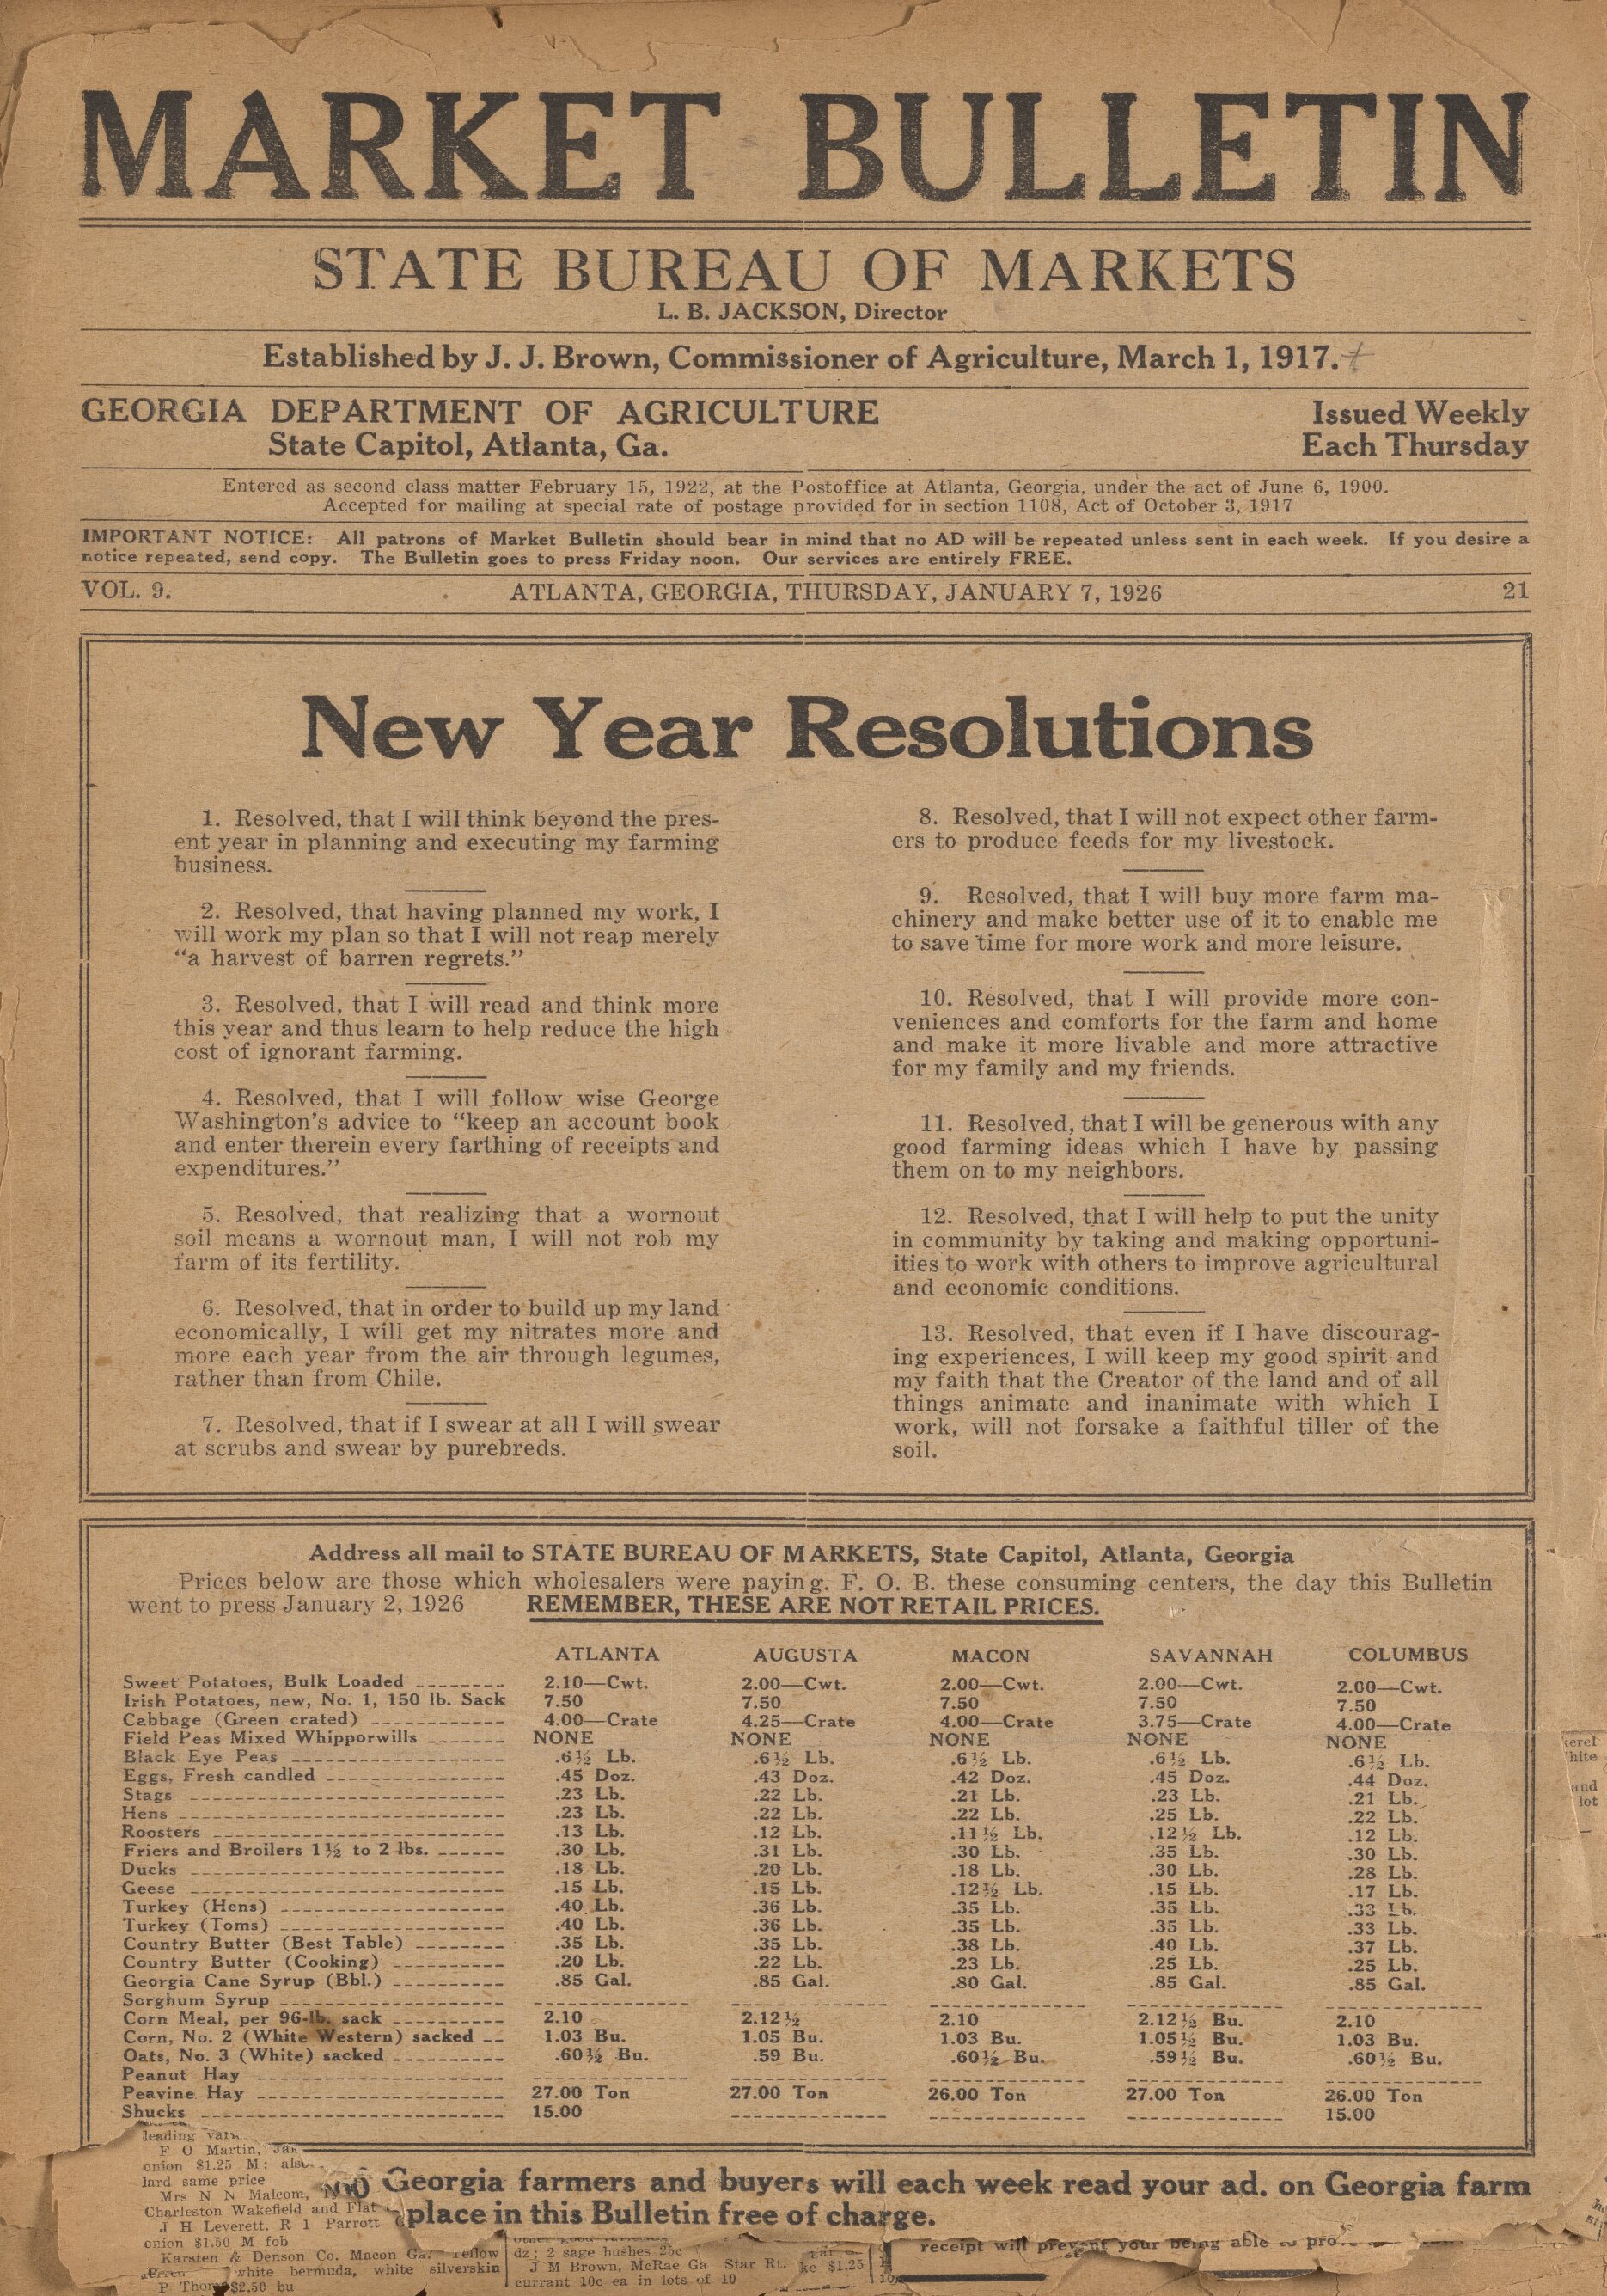 (1926) January 7, 1926, issue of the Market Bulletin